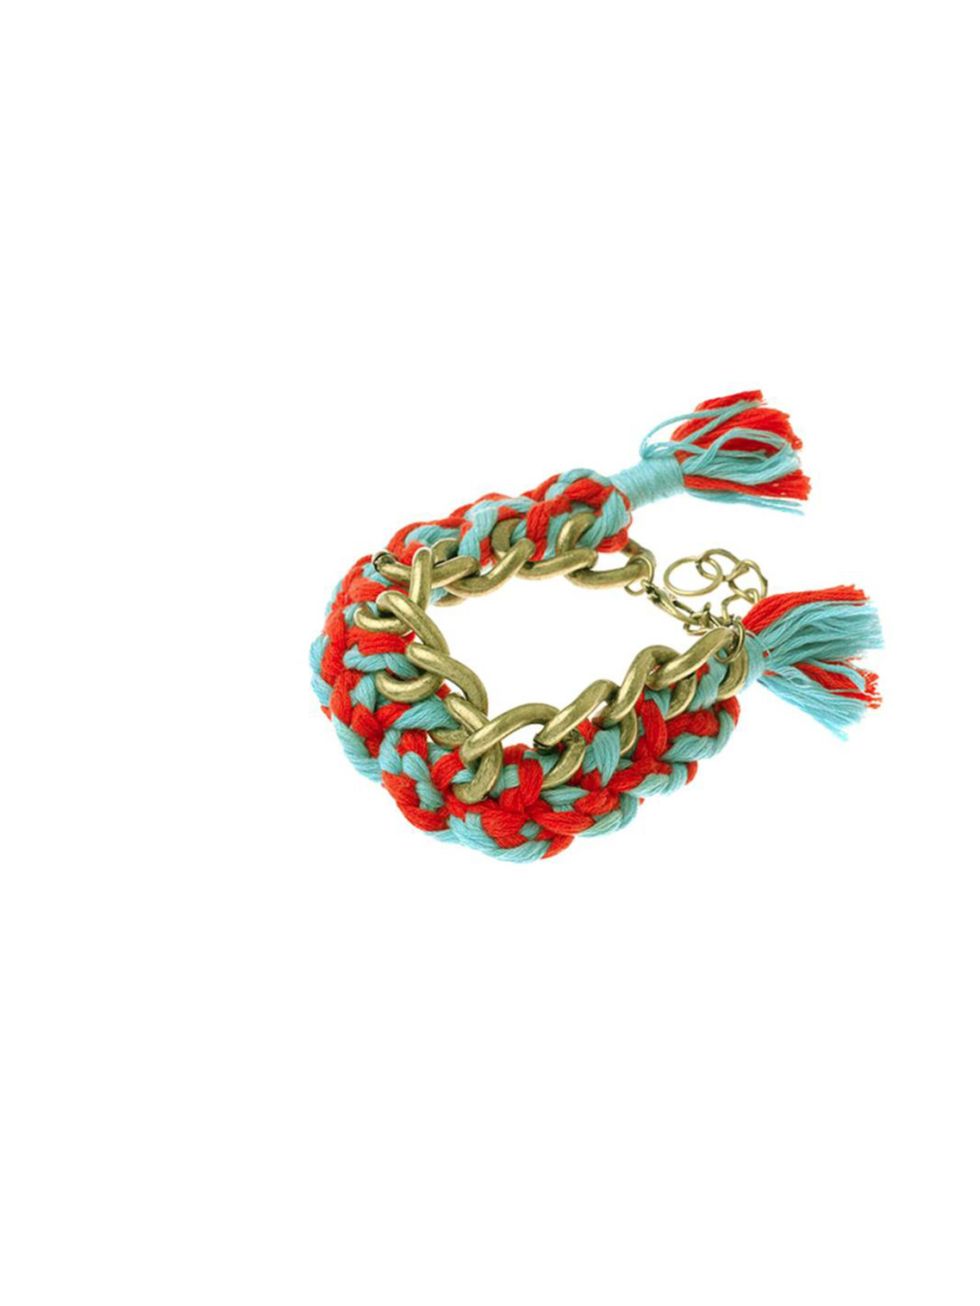 <p>We all know the colourful friendship bracelet is the coolest way to accessorize this season, and at just £7, you can layer up to the max with these new styles <a href="http://www.pretaportobello.com/PPB/Festival-Chain-Bracelet.aspx">PPB</a> braided br